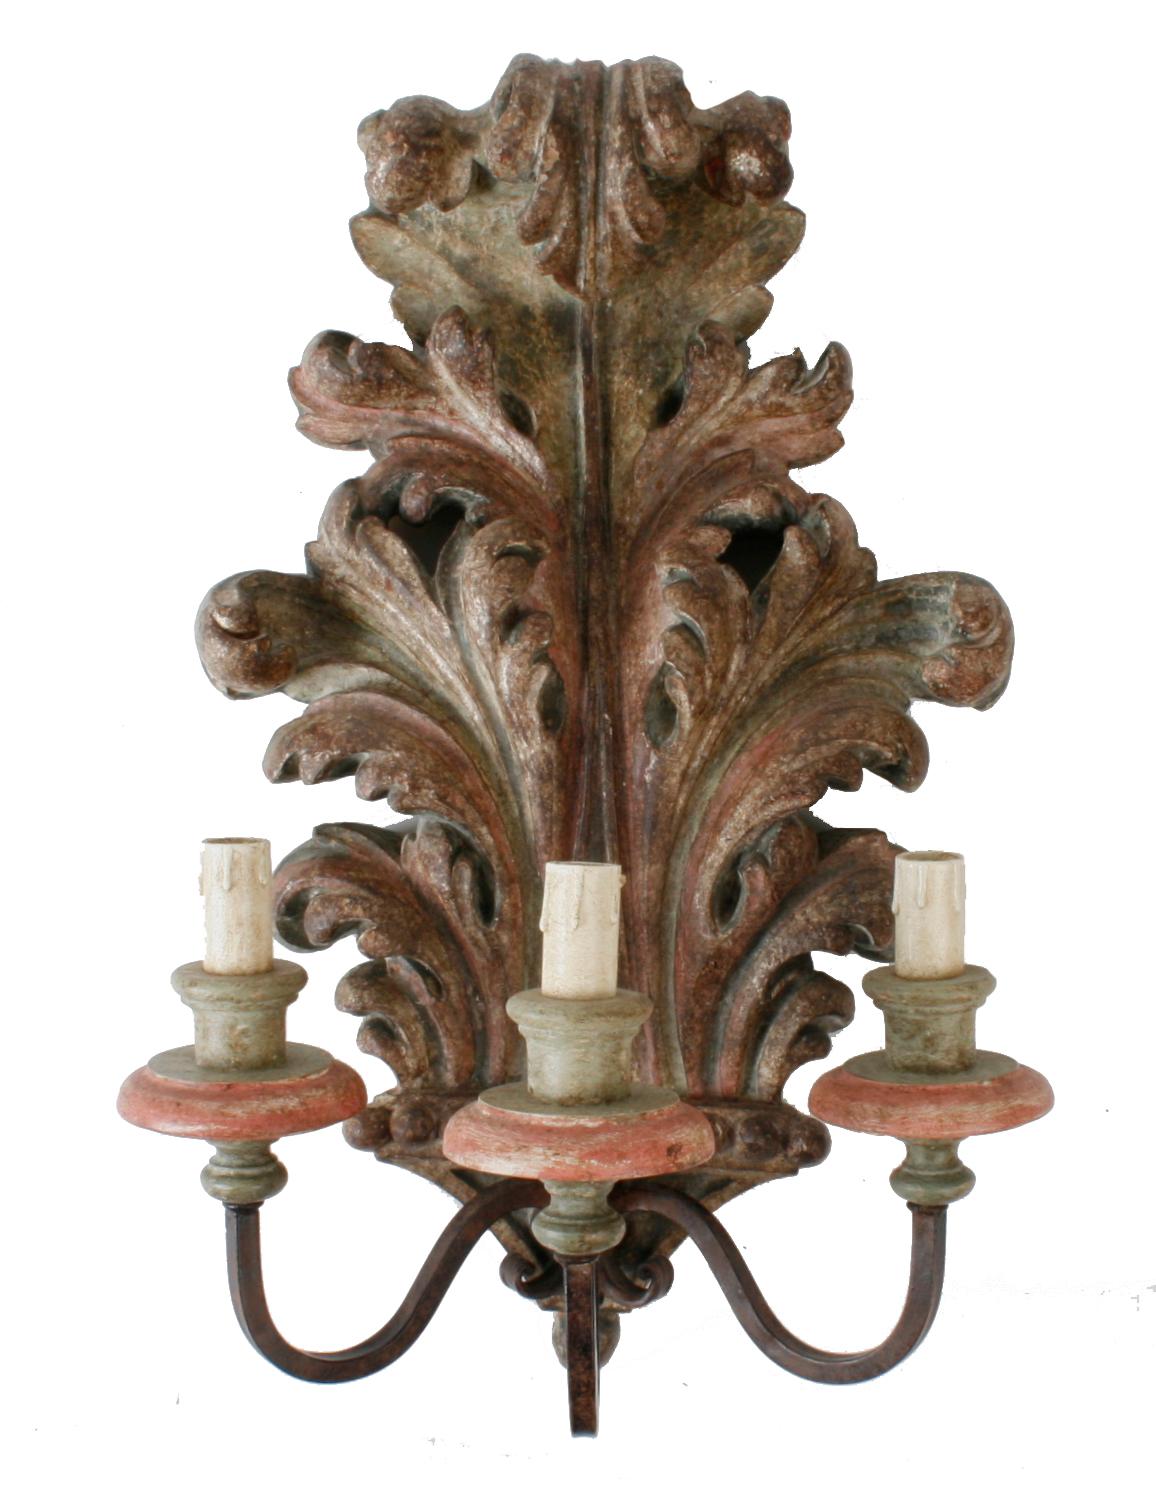 A pair of French carved and painted Acanthus leaf three light wall sconces. Each sconce has a beautiful patinated paint finish with three metal arms holding antiqued mauve bobeche, sage green candle holders, and ivory candle sleeves. The sconces are